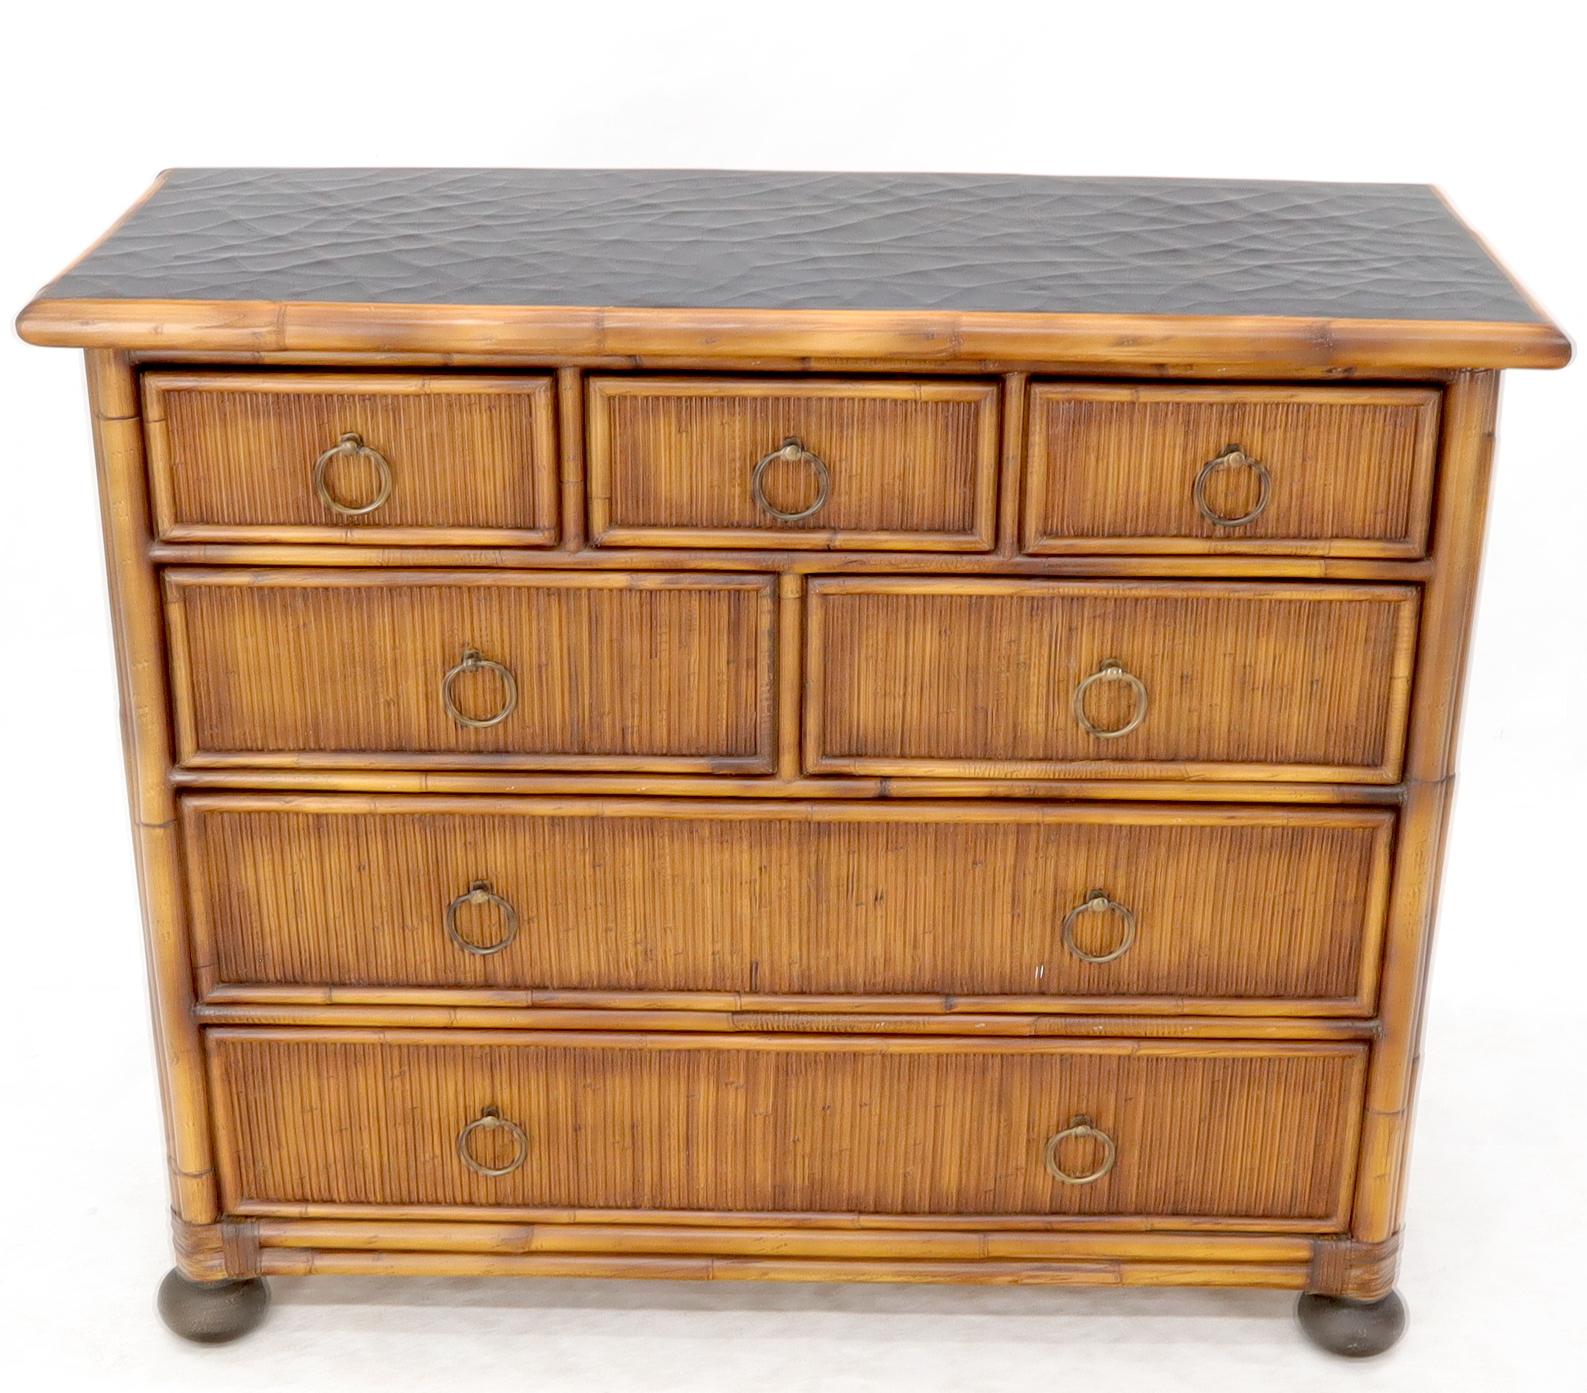 Mid-Century Modern rattan bachelor chest of drawers dresser by Baker in style of Michael Taylor.